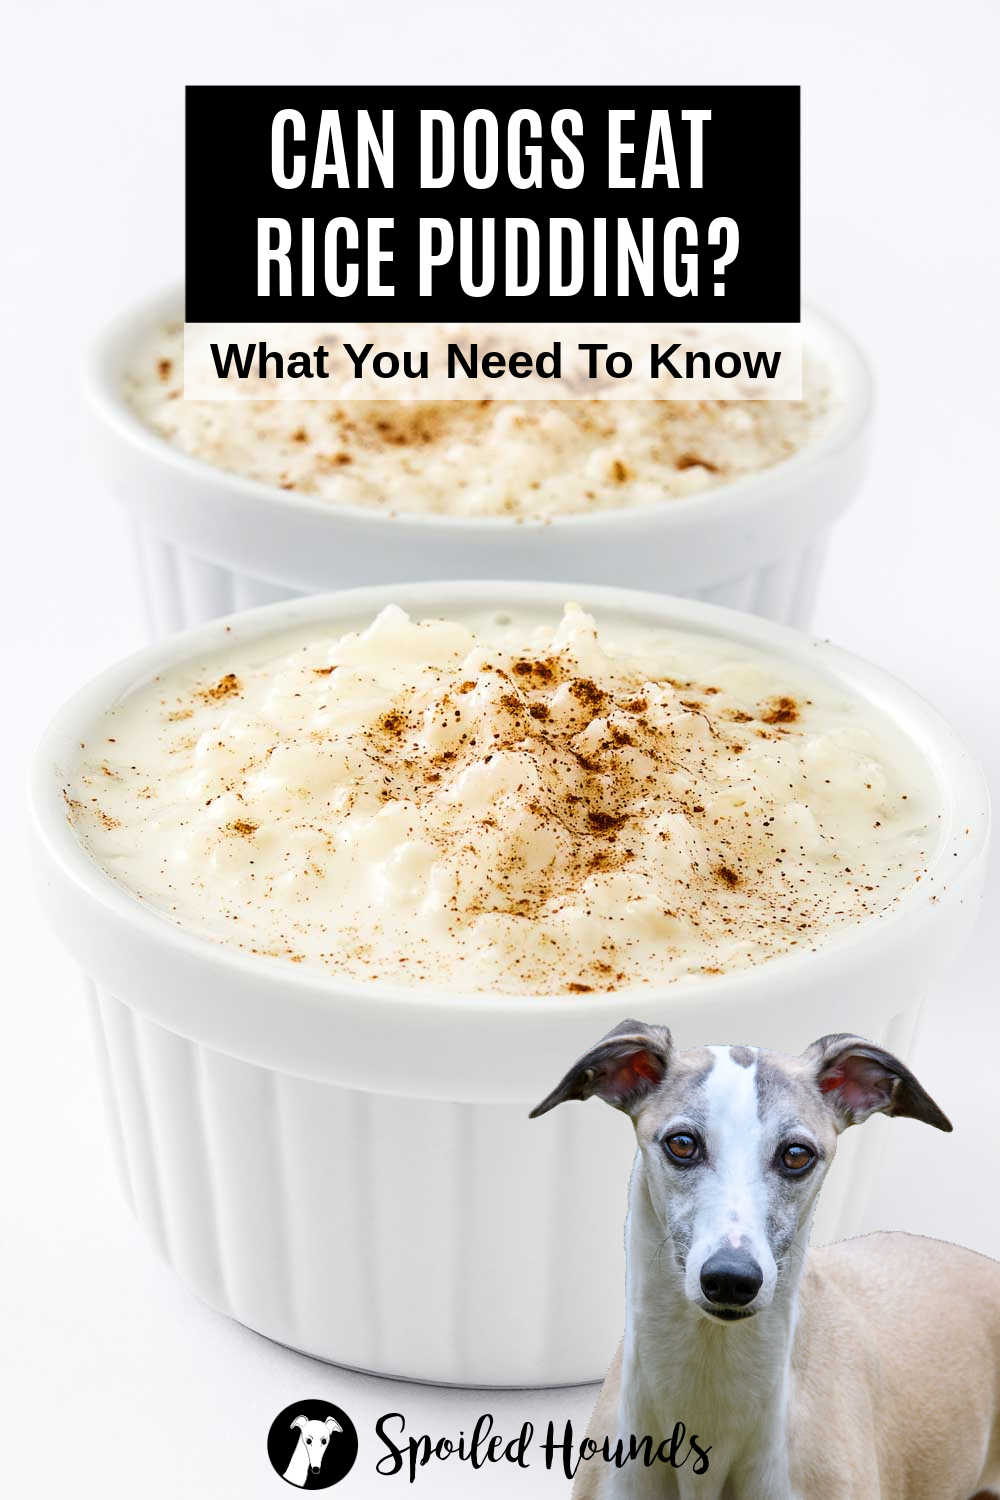 Whippet dog in front of two bowls of rice pudding.